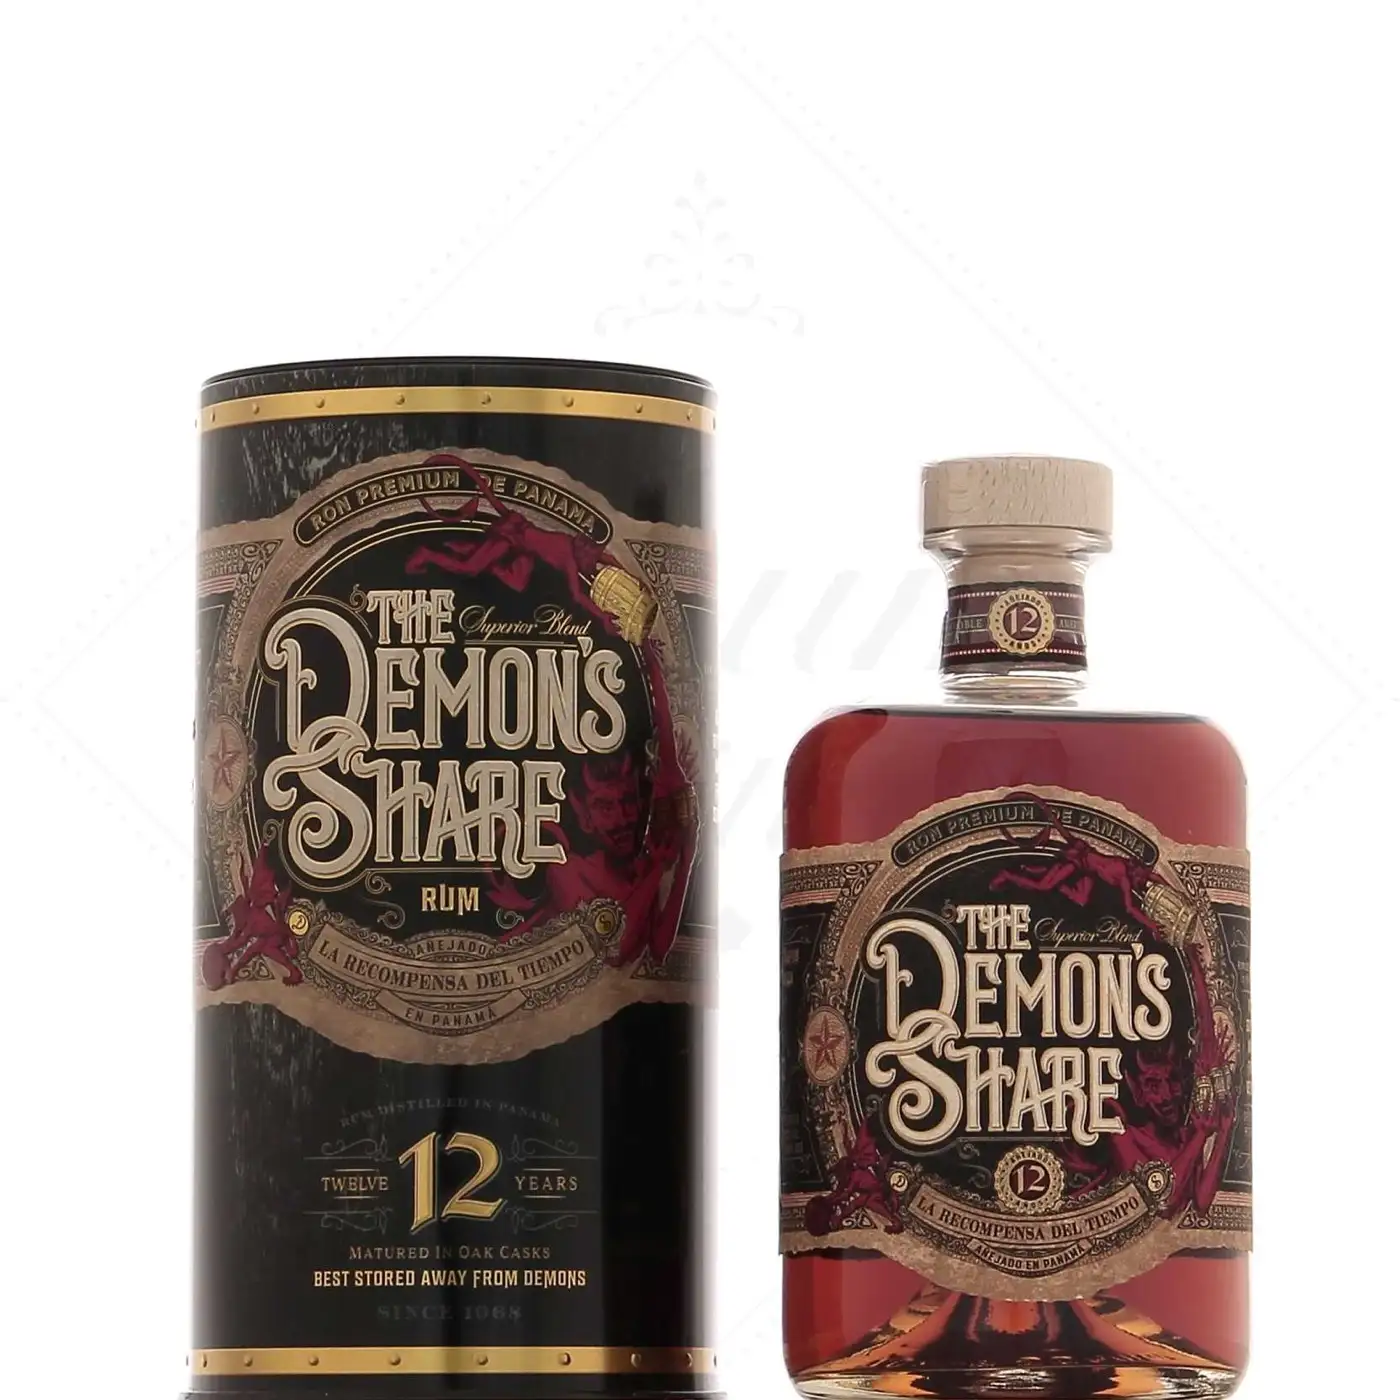 Image of the front of the bottle of the rum The Demon’s Share